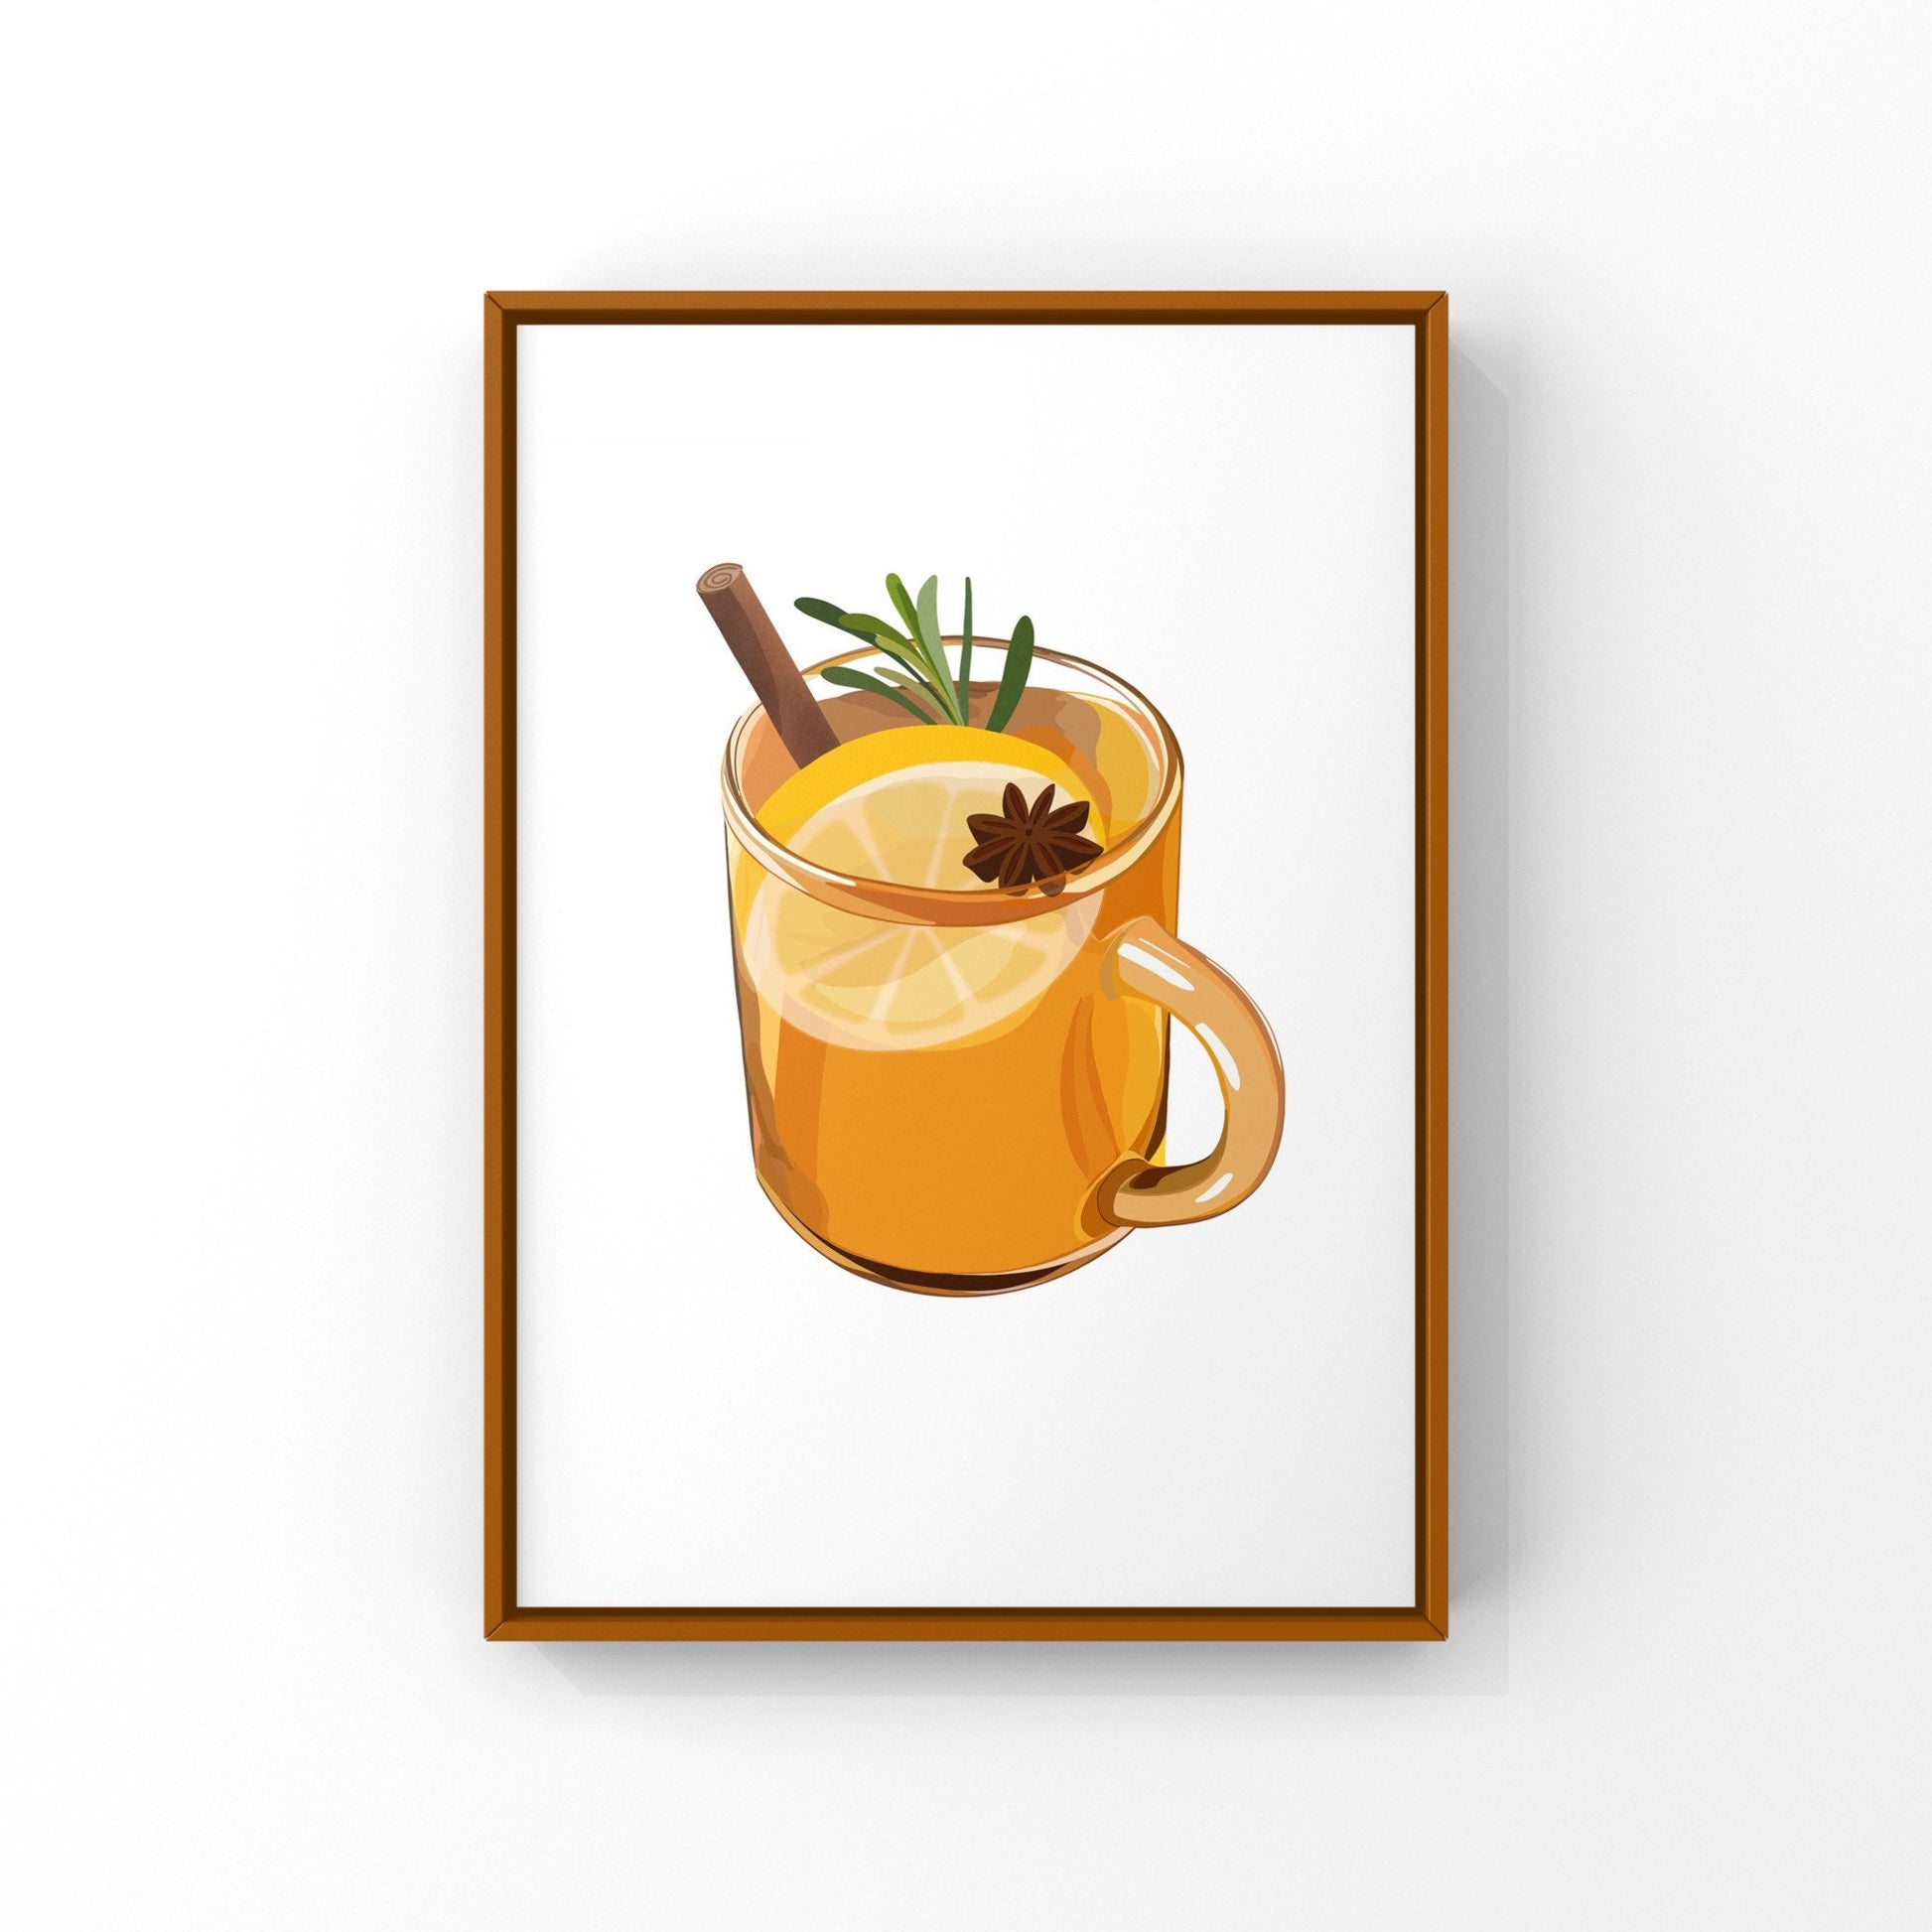 Hand-drawn illustration of a hot toddy - enjoy looking at this one-of-a-kind wall art while you sip on a warm and toasty hot toddy of your own! This art print would look great hanging above your bar or your bar cart, or as part of a gallery wall! Also makes a great gift for any alcohol or hot toddy lover in your life!